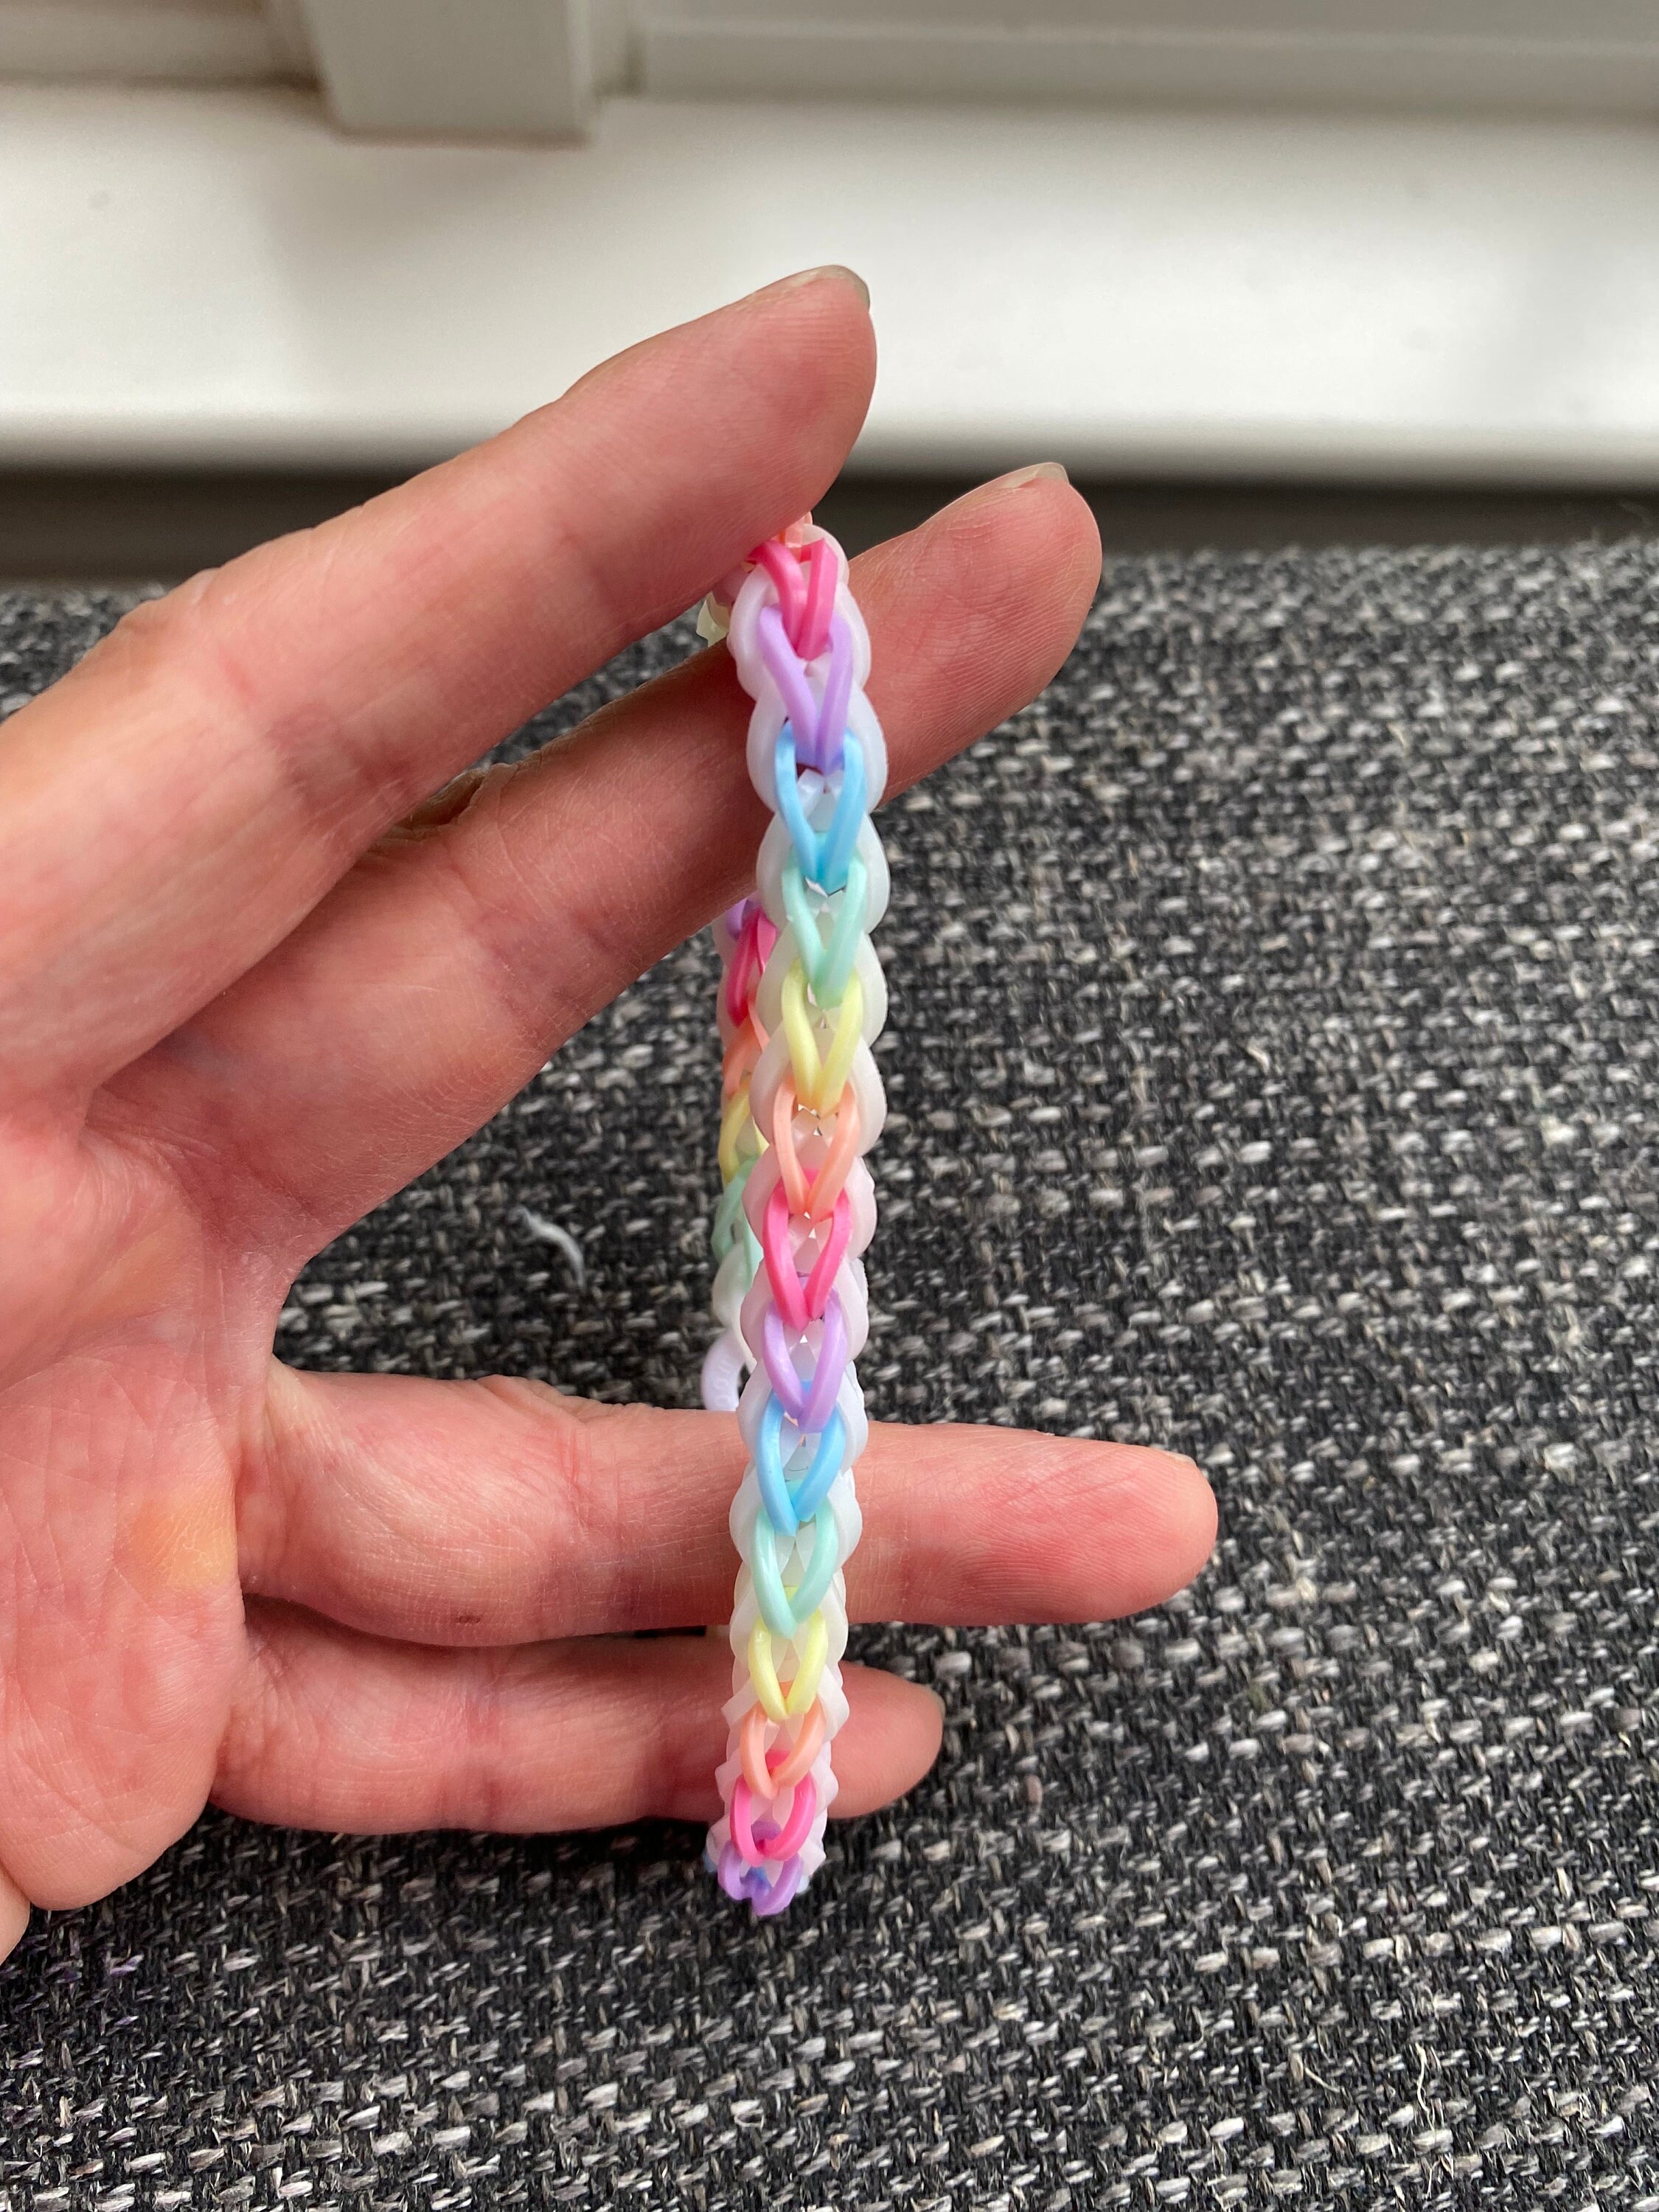 For Power Suits in Executive Suites, the Latest Accessory Is Rainbow Loom -  WSJ